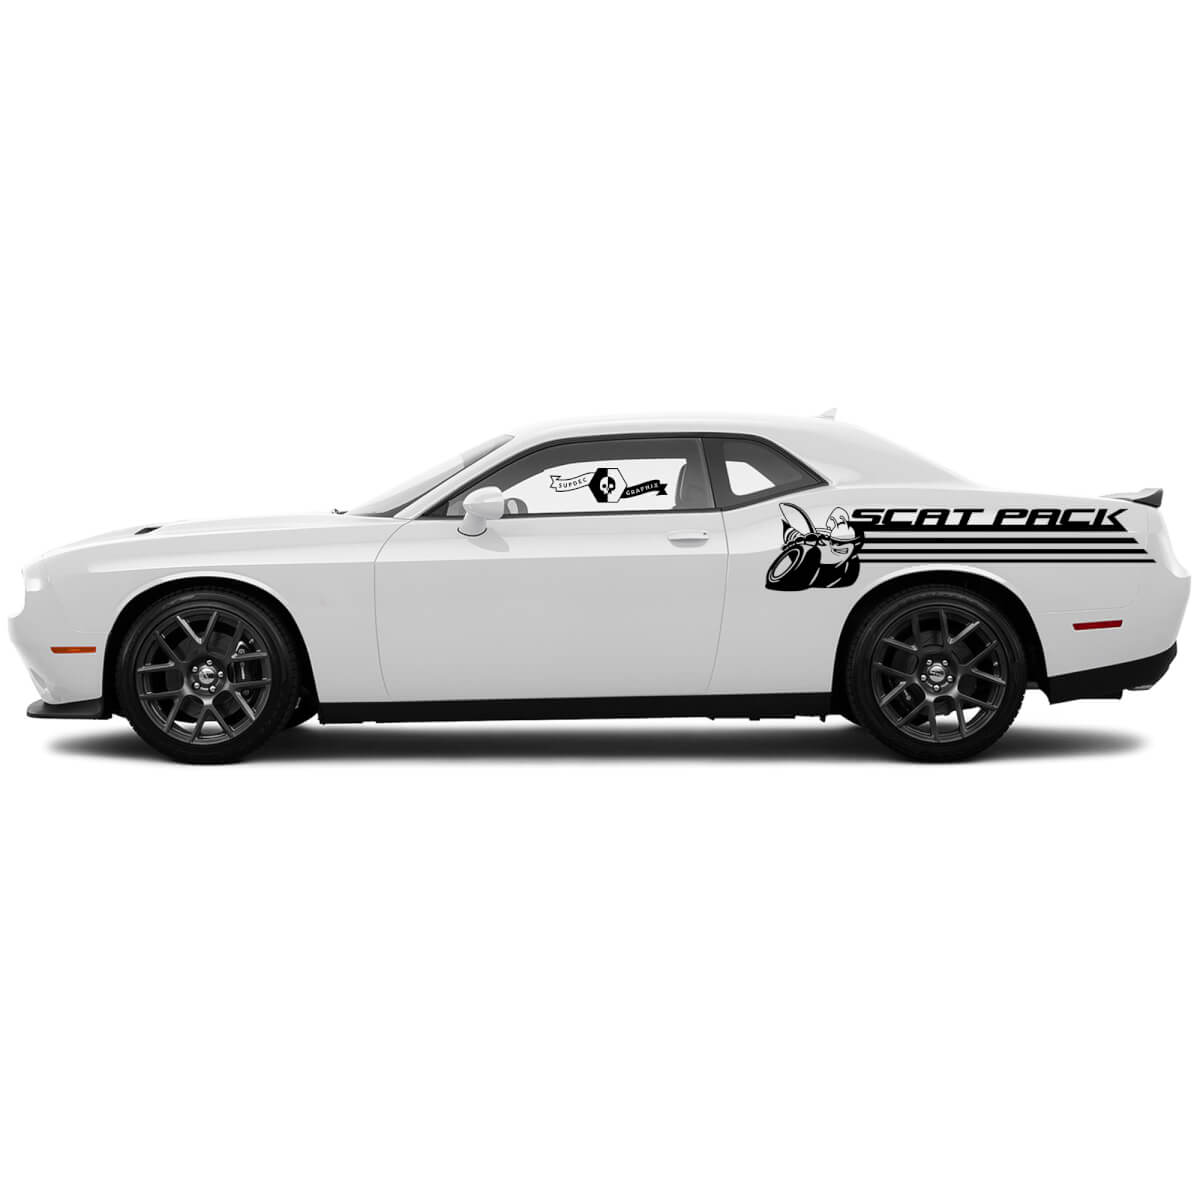 Scat Pack Line side decals for Dodge Challenger or Charger Vinyl Decals Stickers